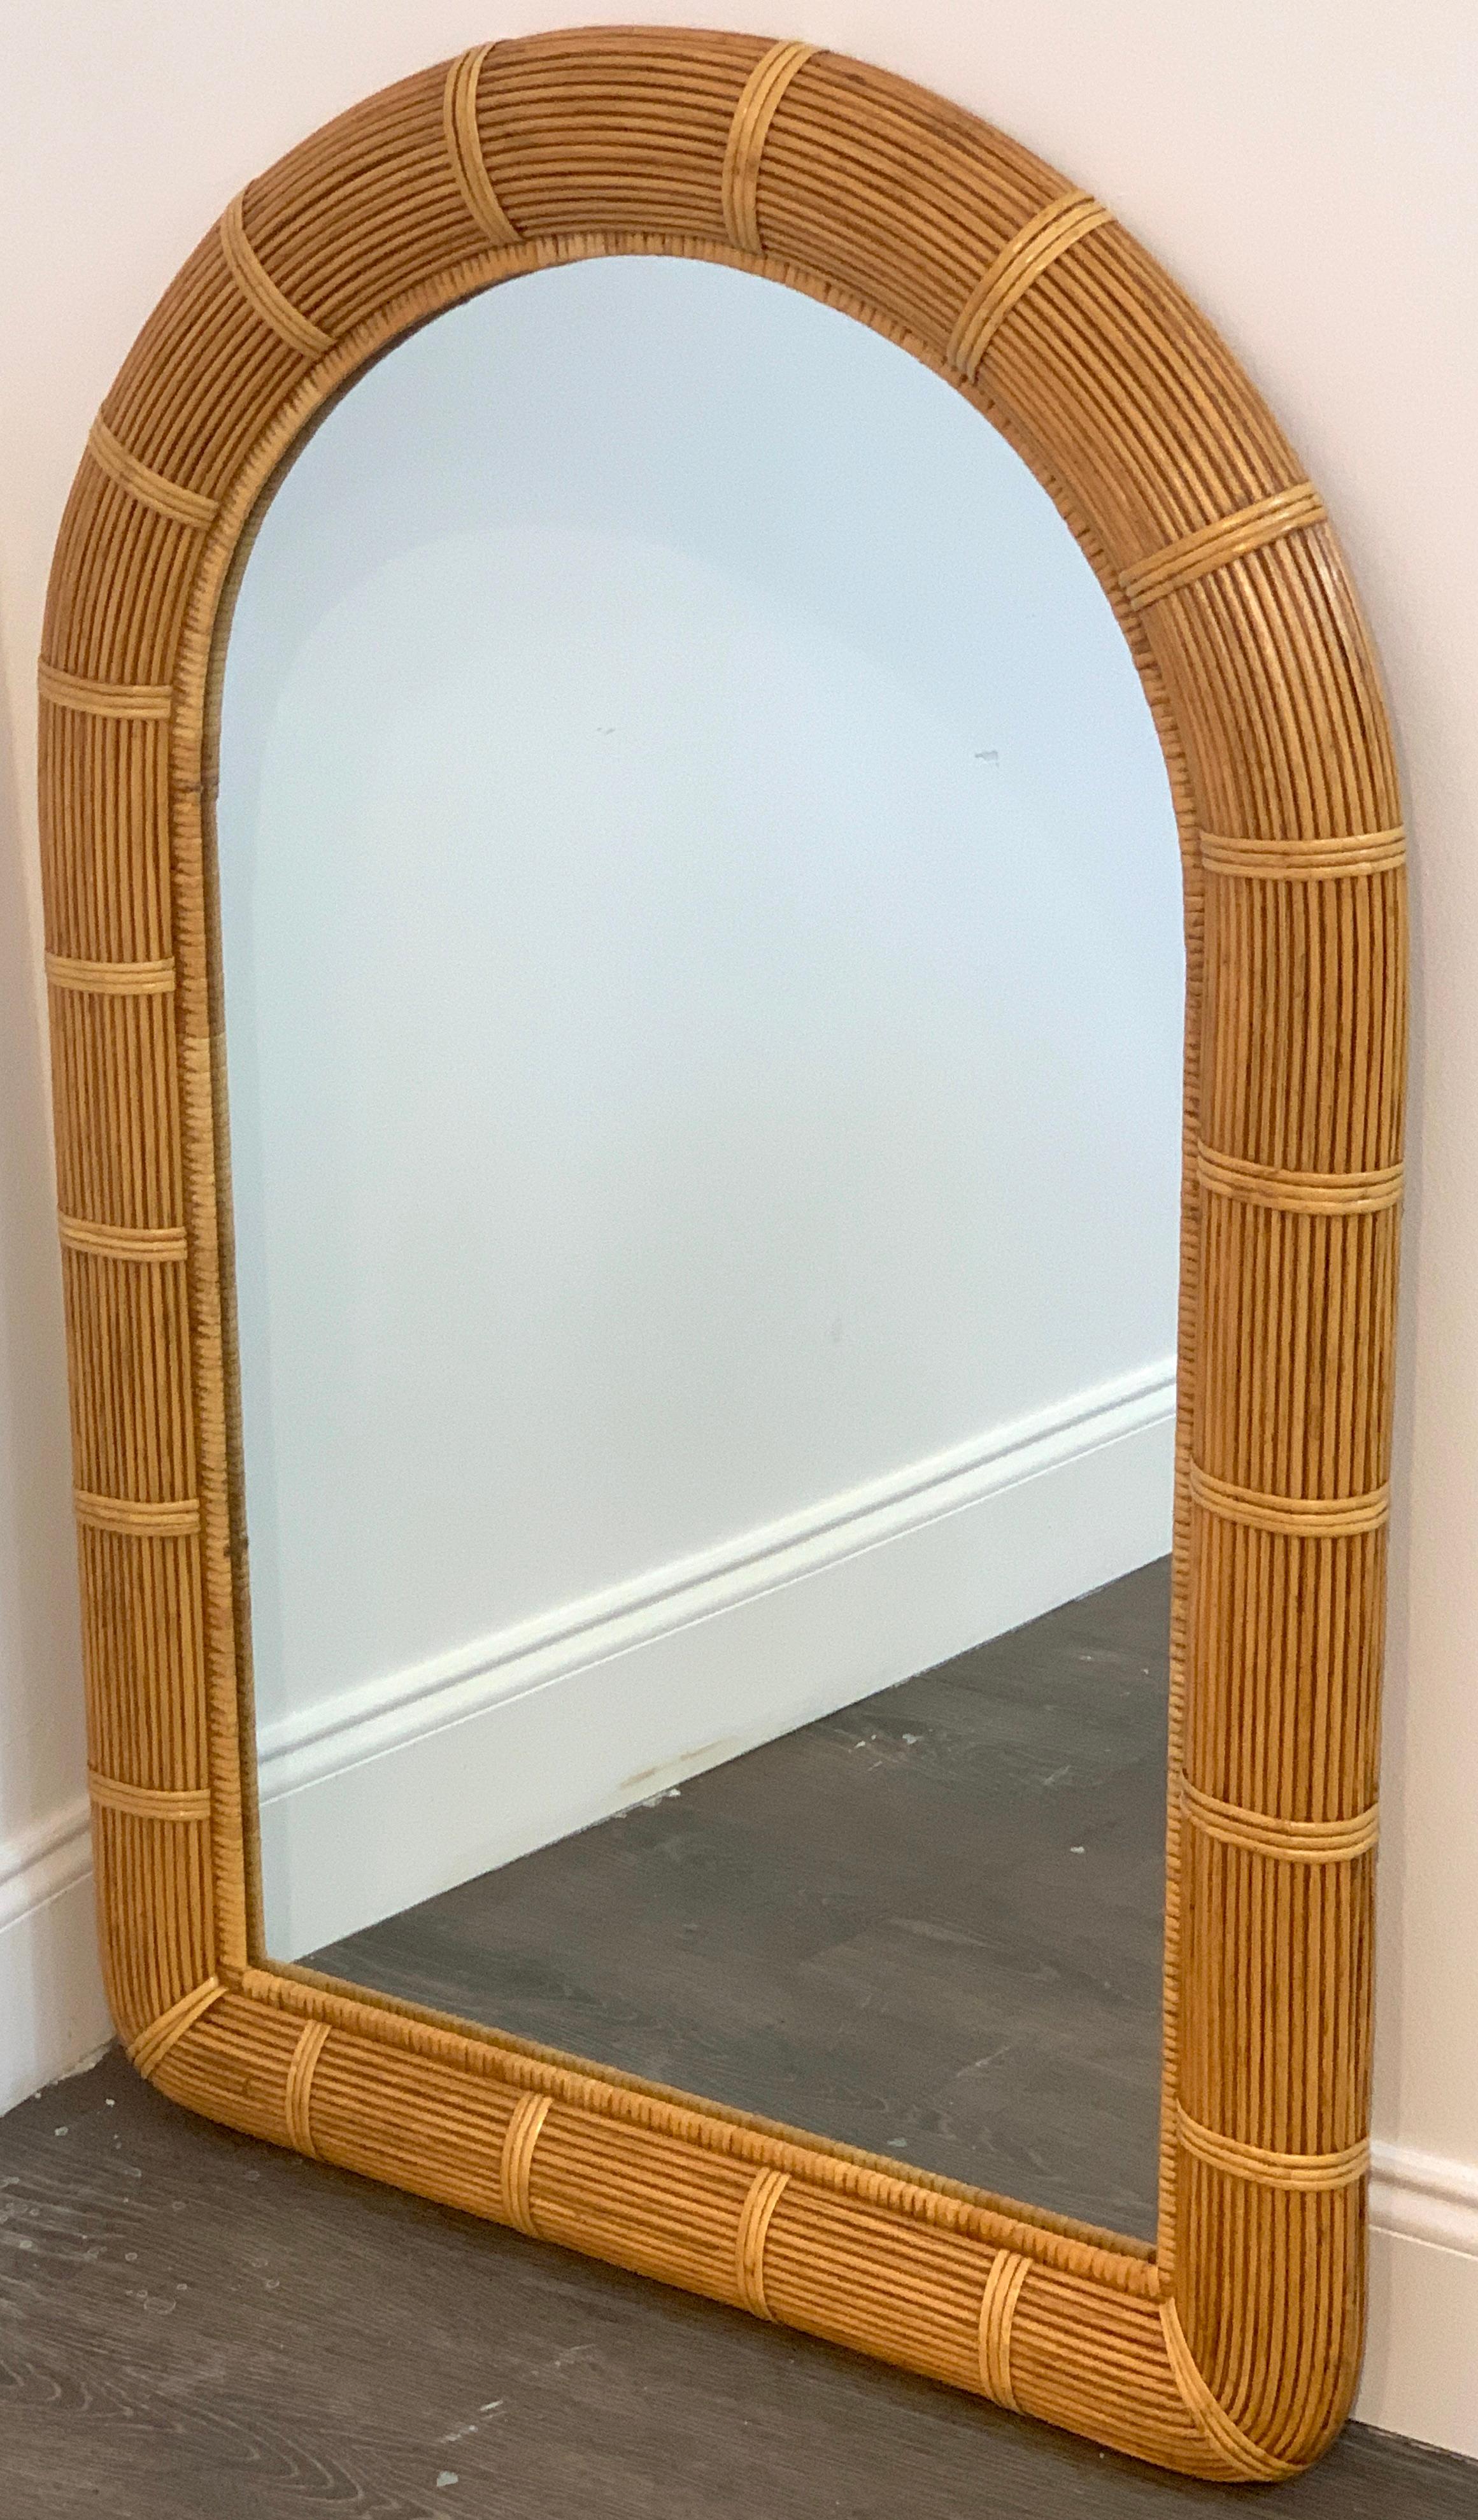 Midcentury wrapped pencil reed rattan demilune mirror, nice color, beautifully constructed, good size with 21